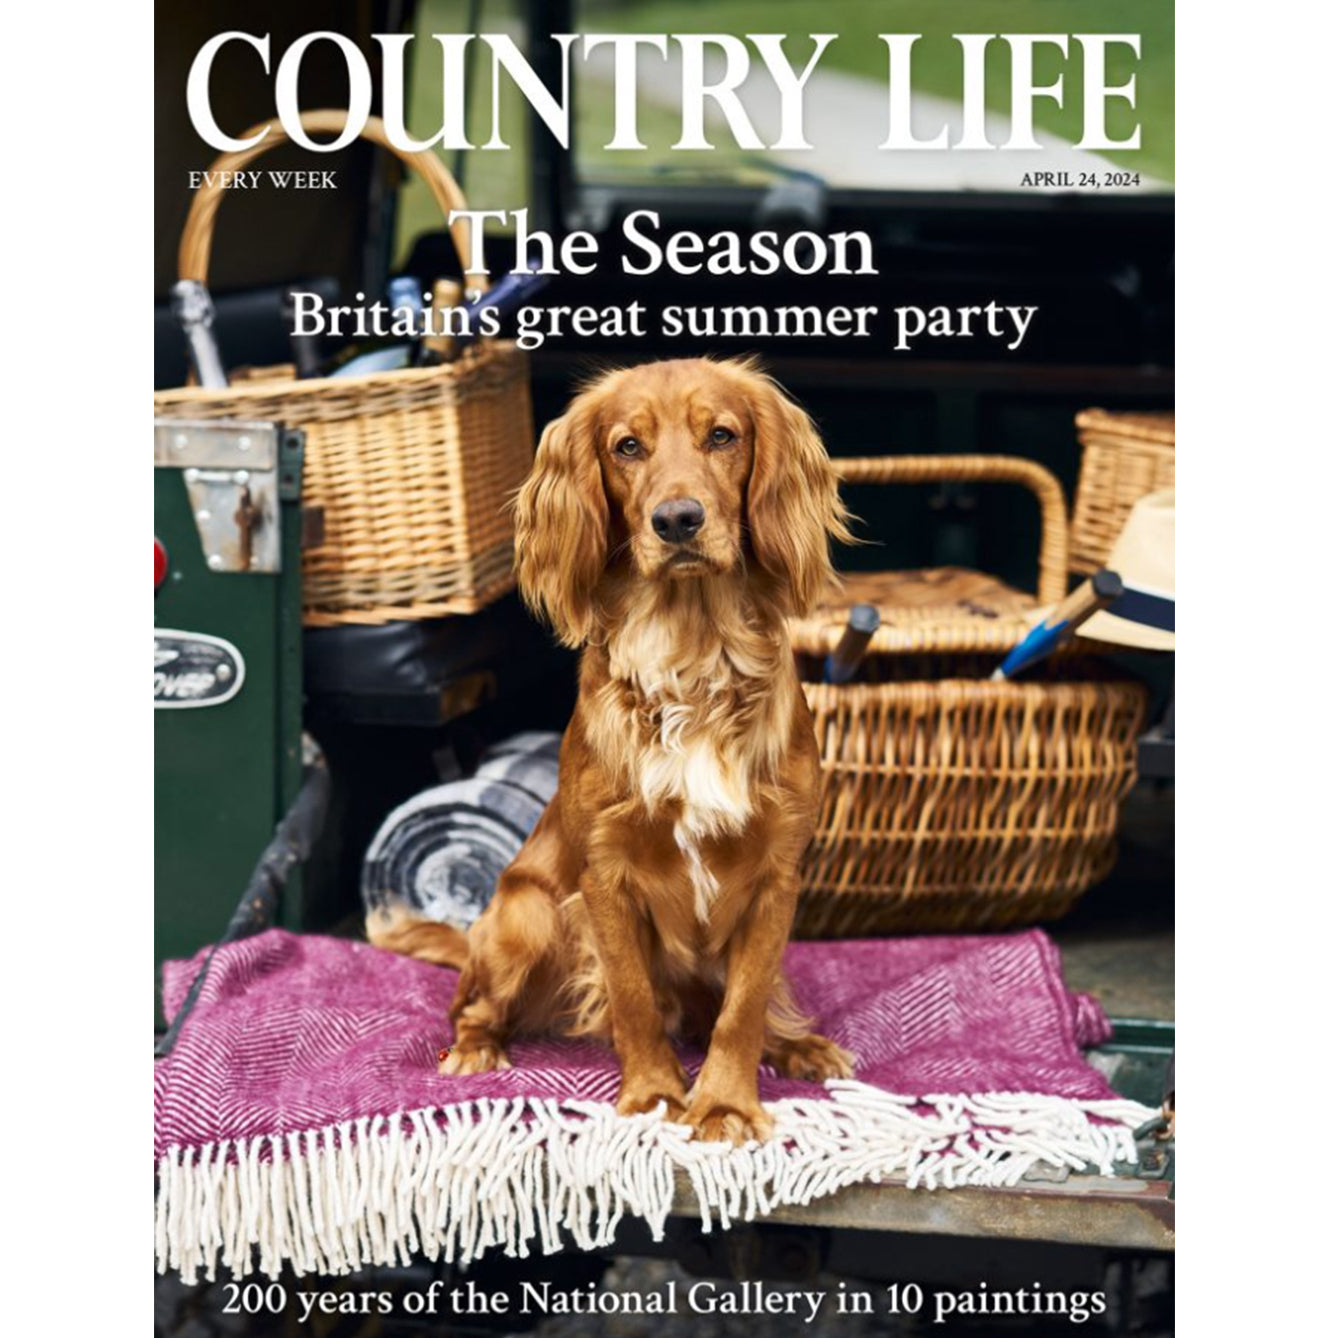 PRESS COVERAGE: COUNTRY LIFE